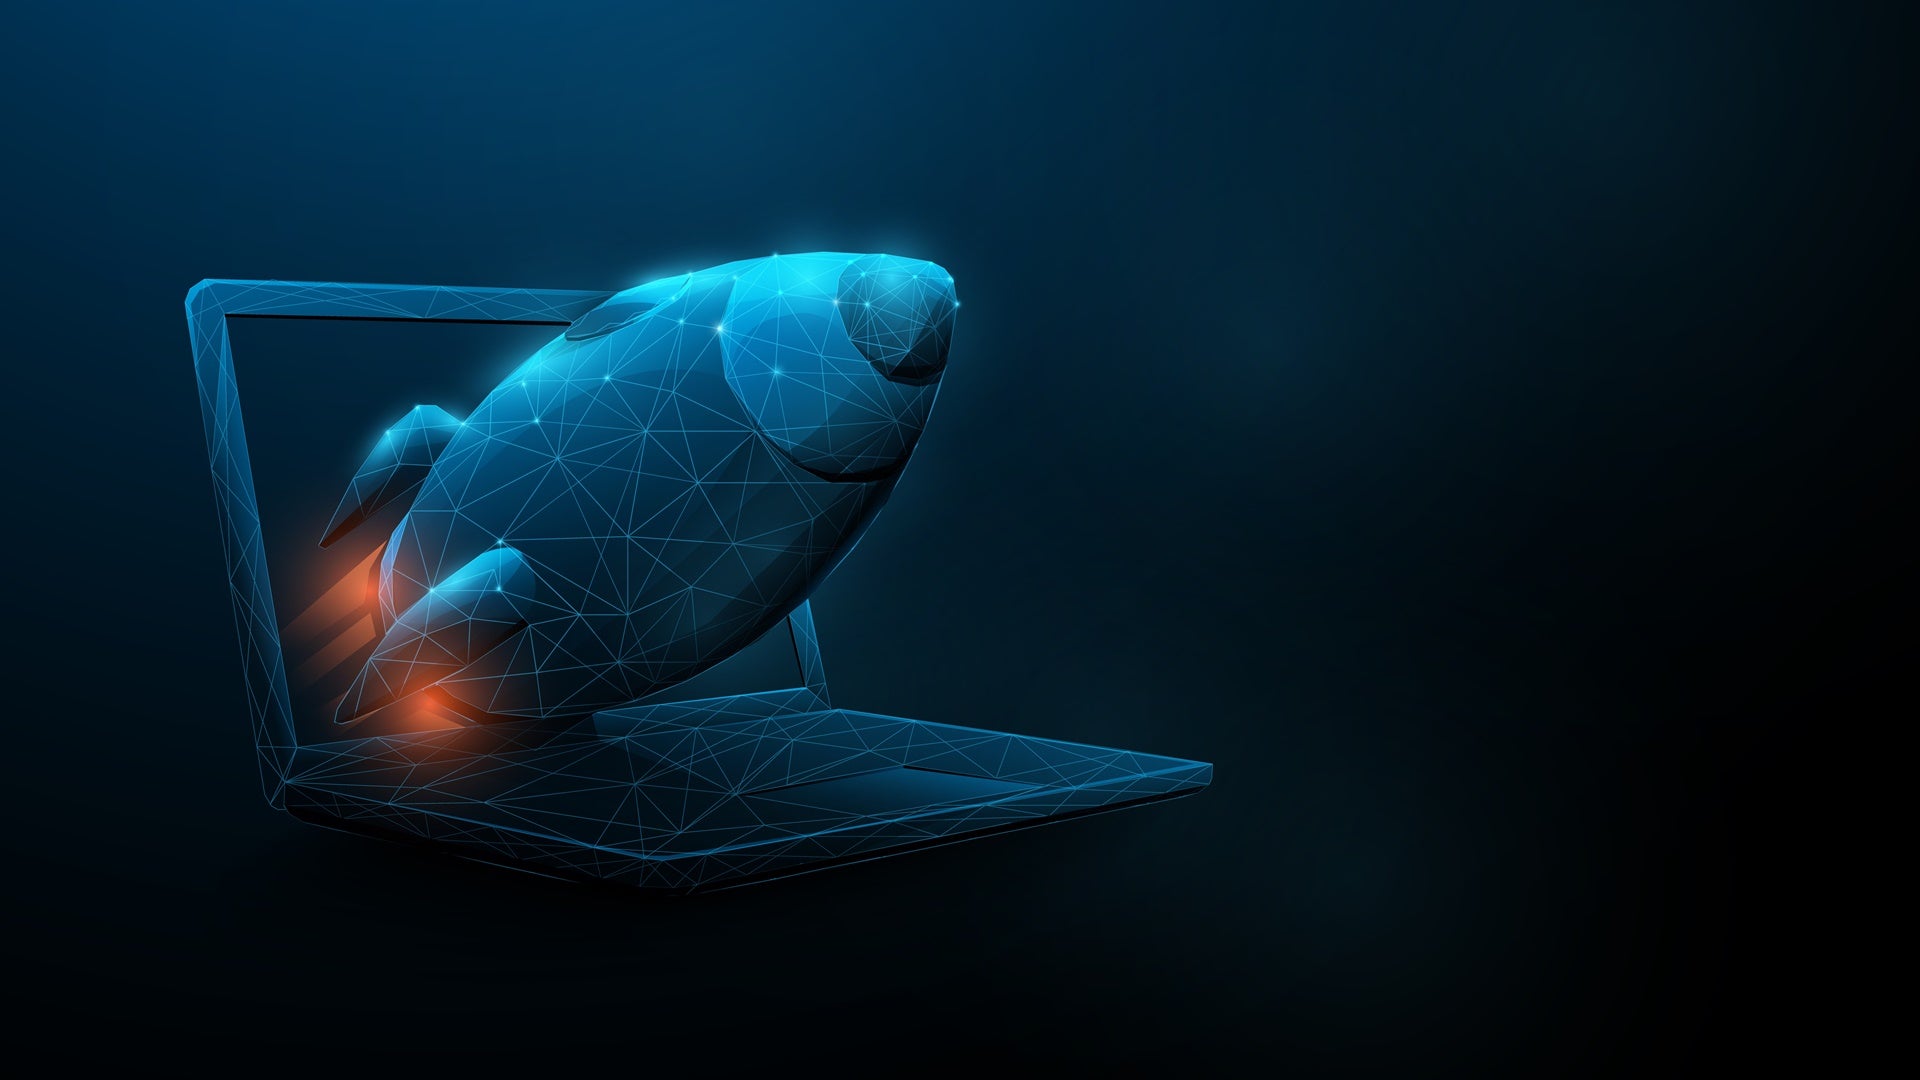 Startup Concept. Rocket Flying Out of Laptop Screen From Lines, Triangles and Low Poly Style Design. Illustration Vector